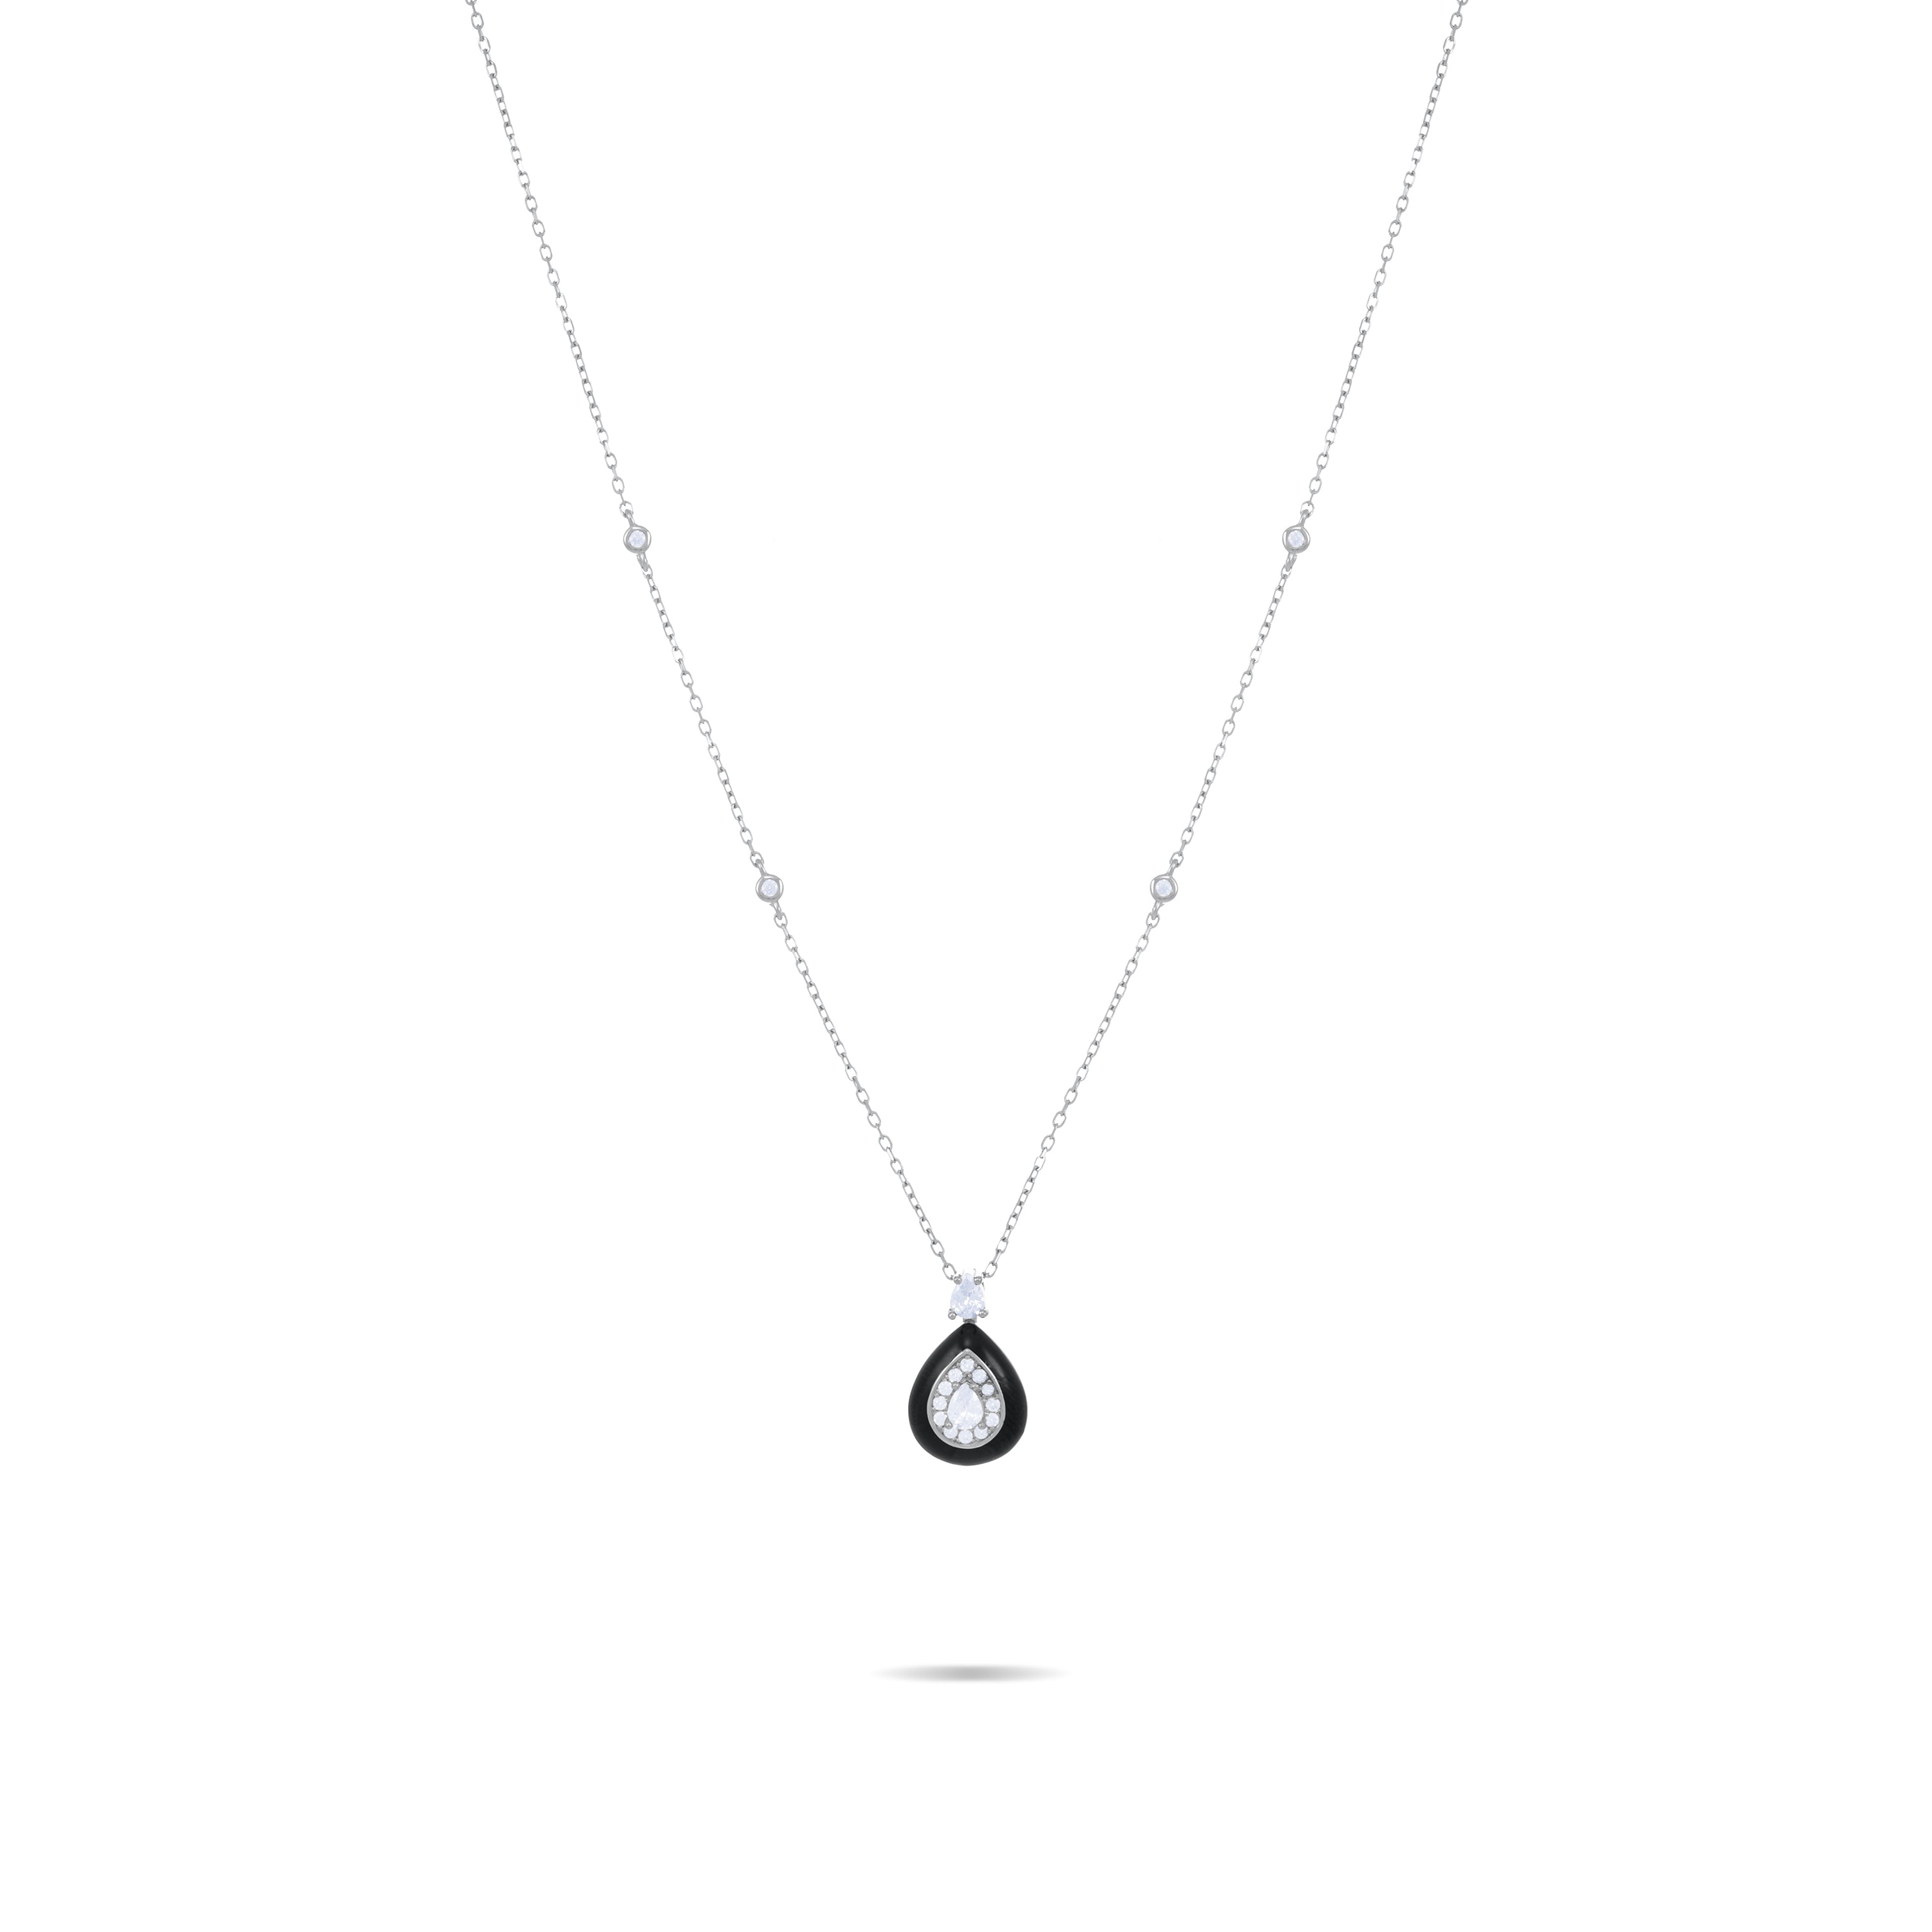 Teardrop Shaped And Framed Enamel With CZ Necklace